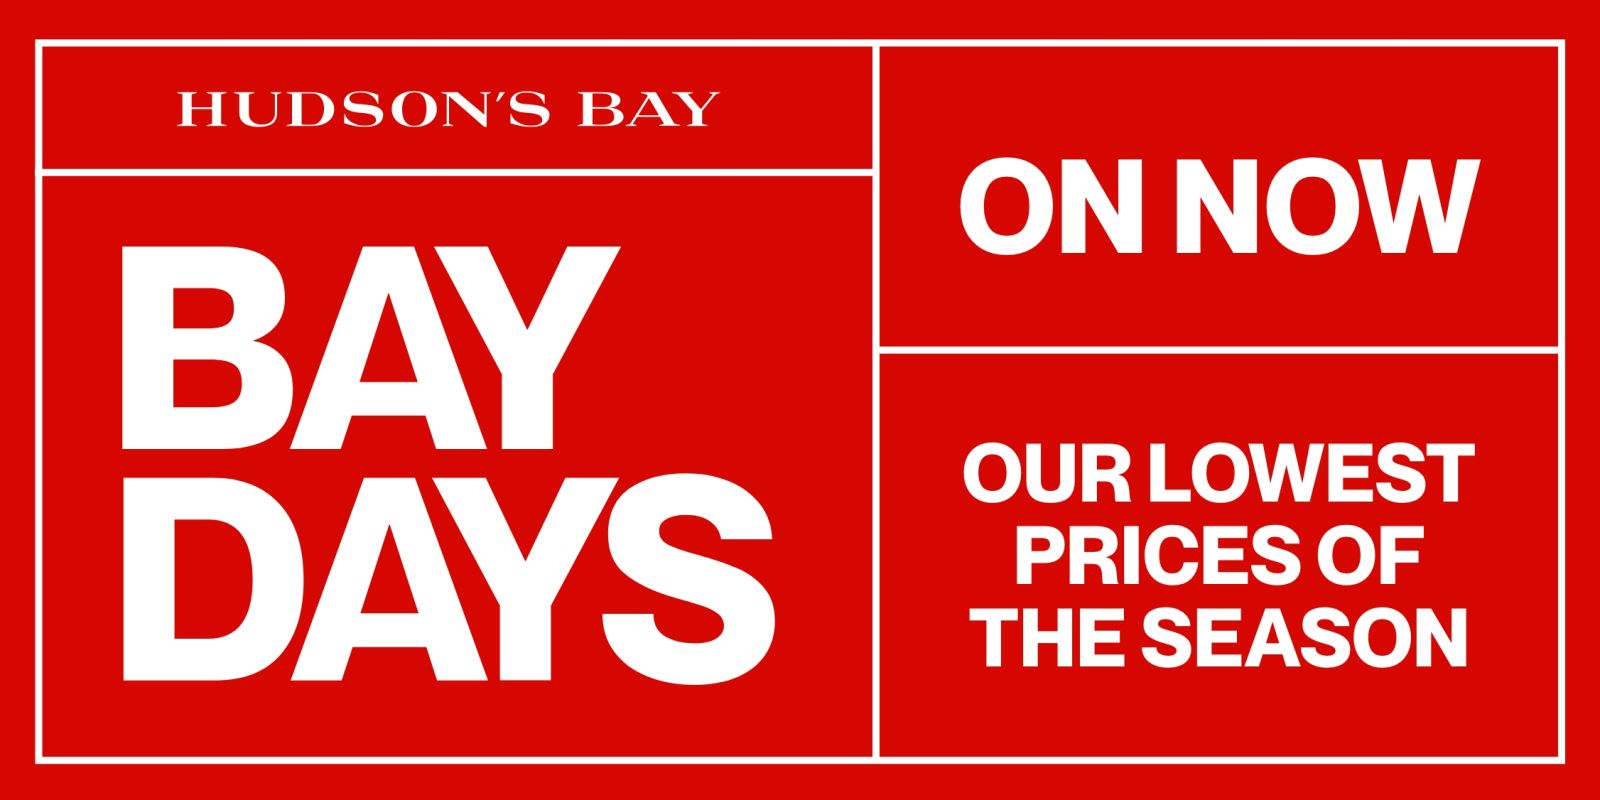 Bay Days is here